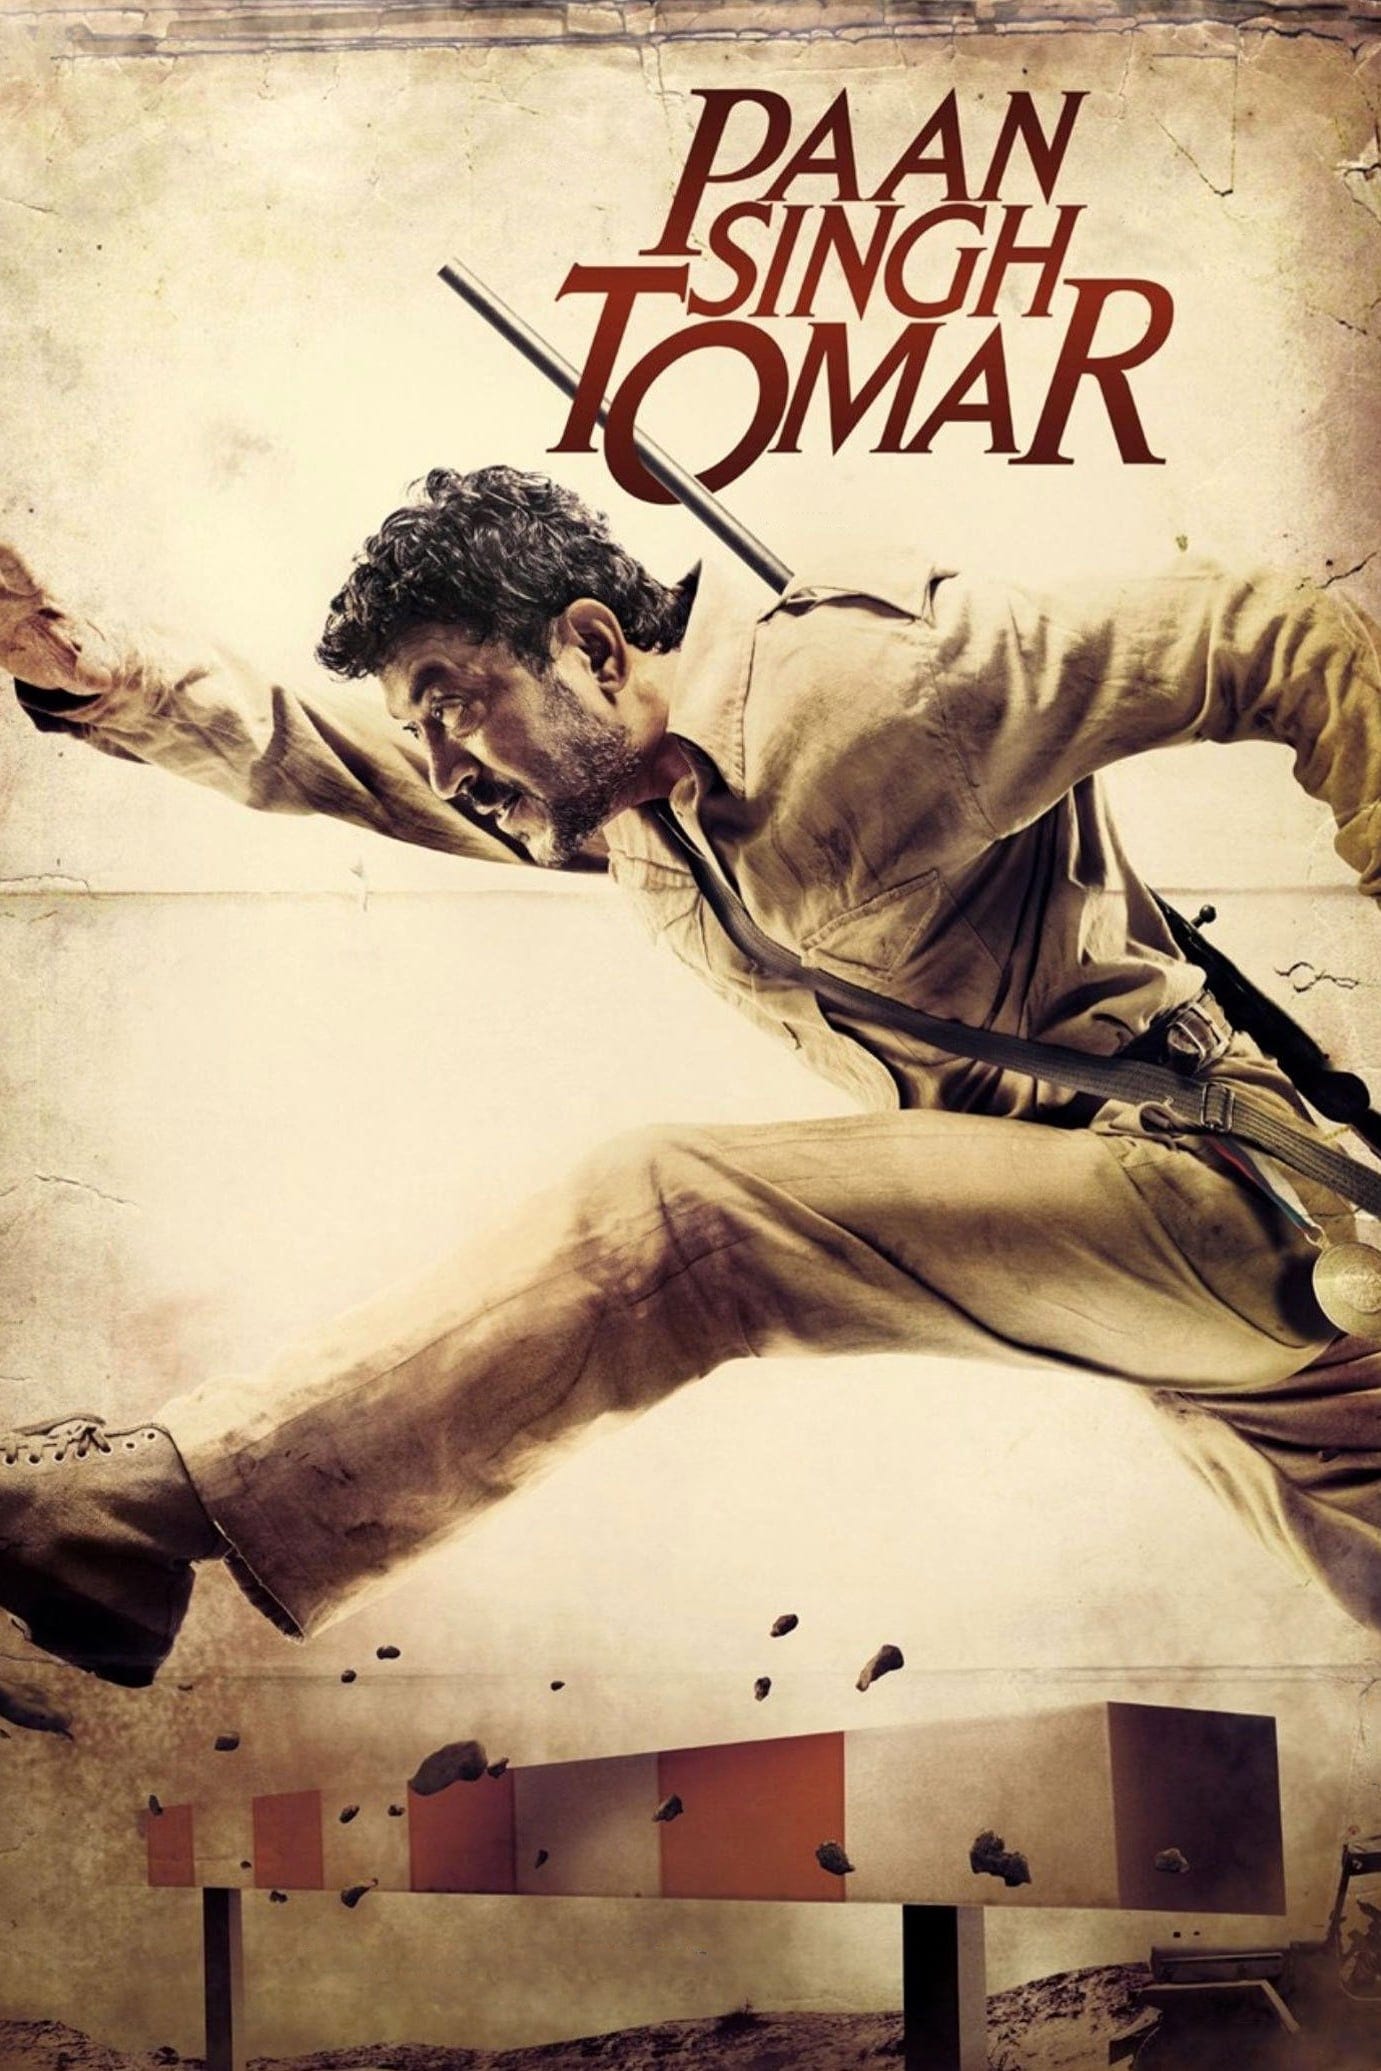 Poster for the movie "Paan Singh Tomar"